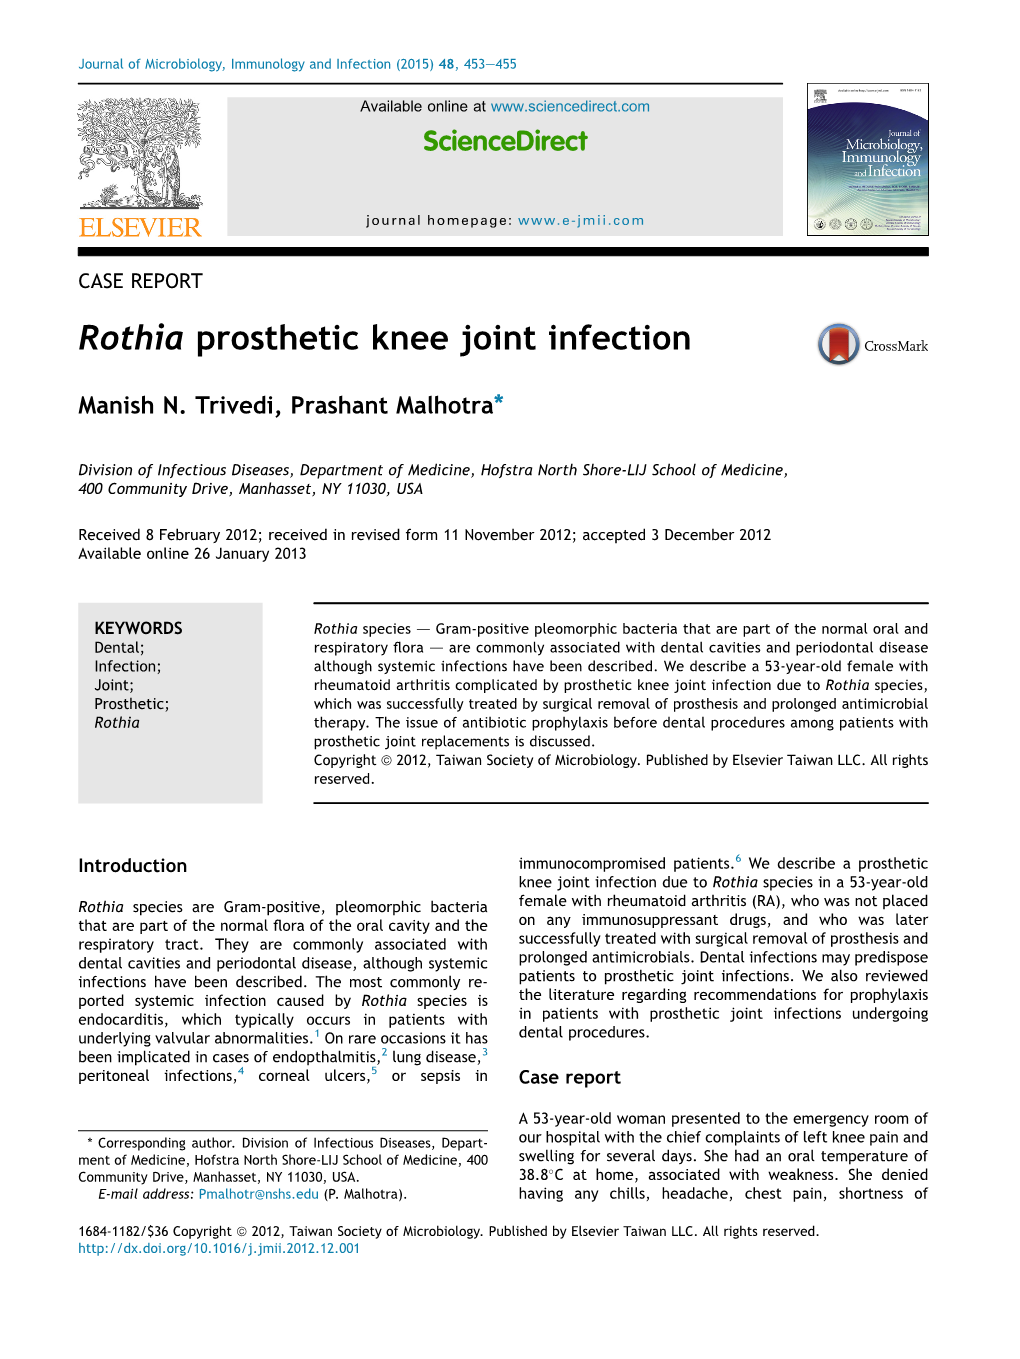 Rothia Prosthetic Knee Joint Infection